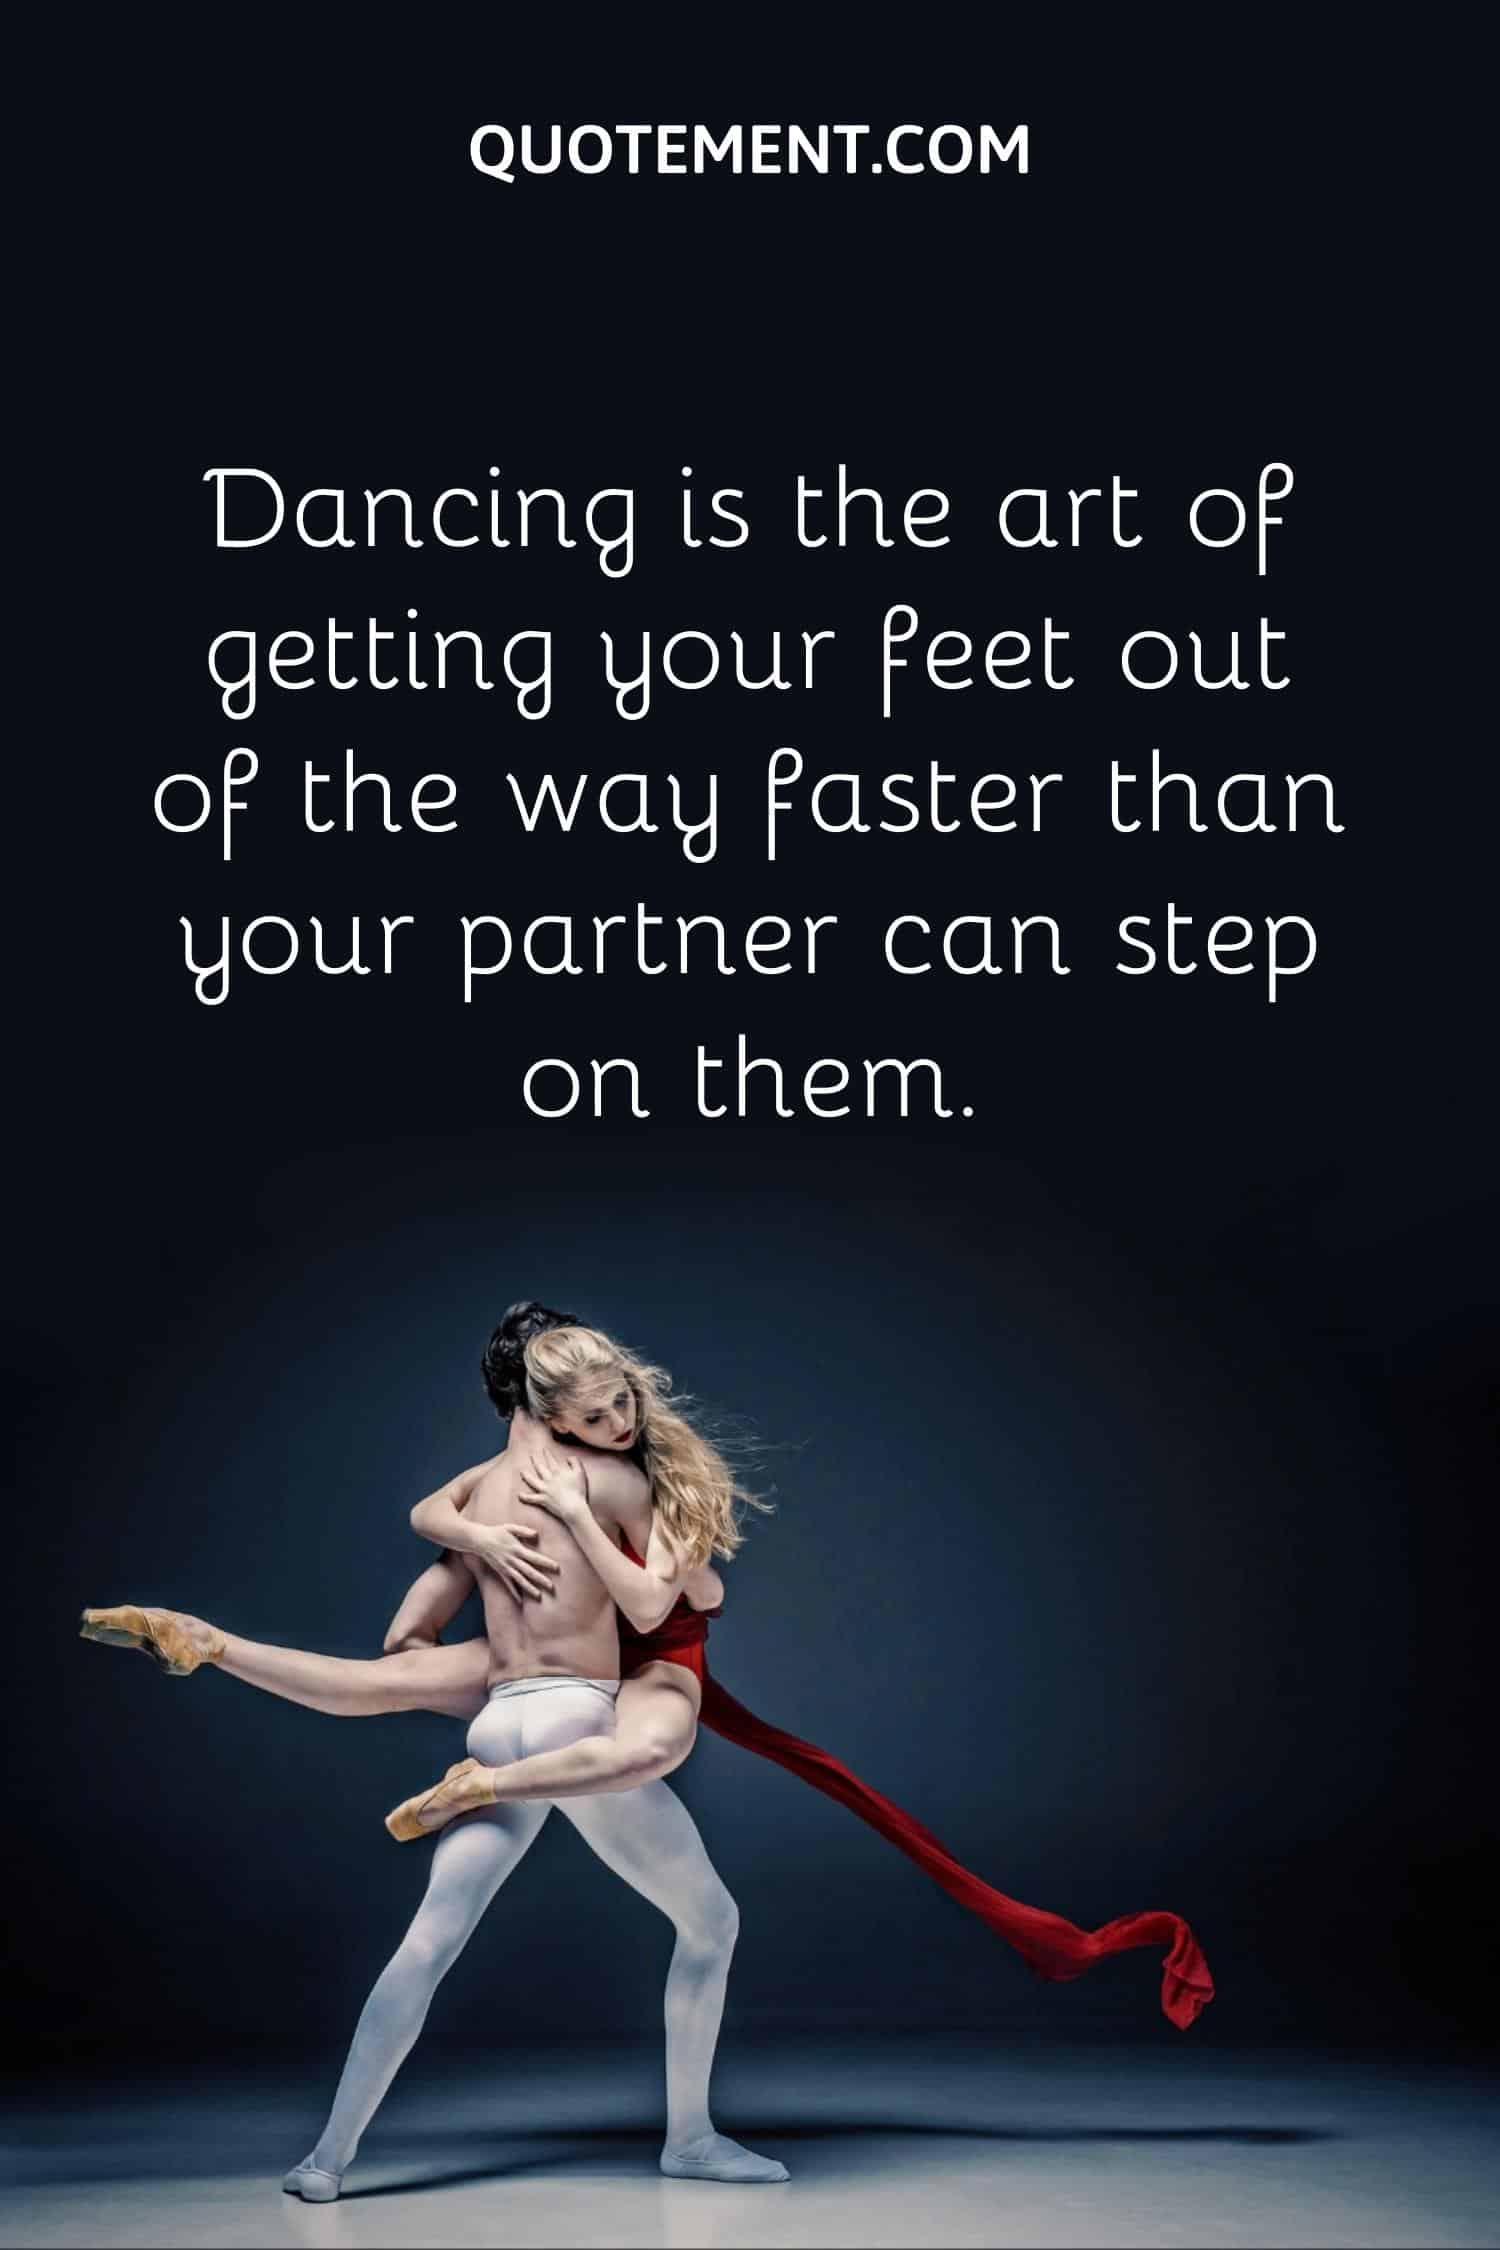 Dancing is the art of getting your feet out of the way faster than your partner can step on them